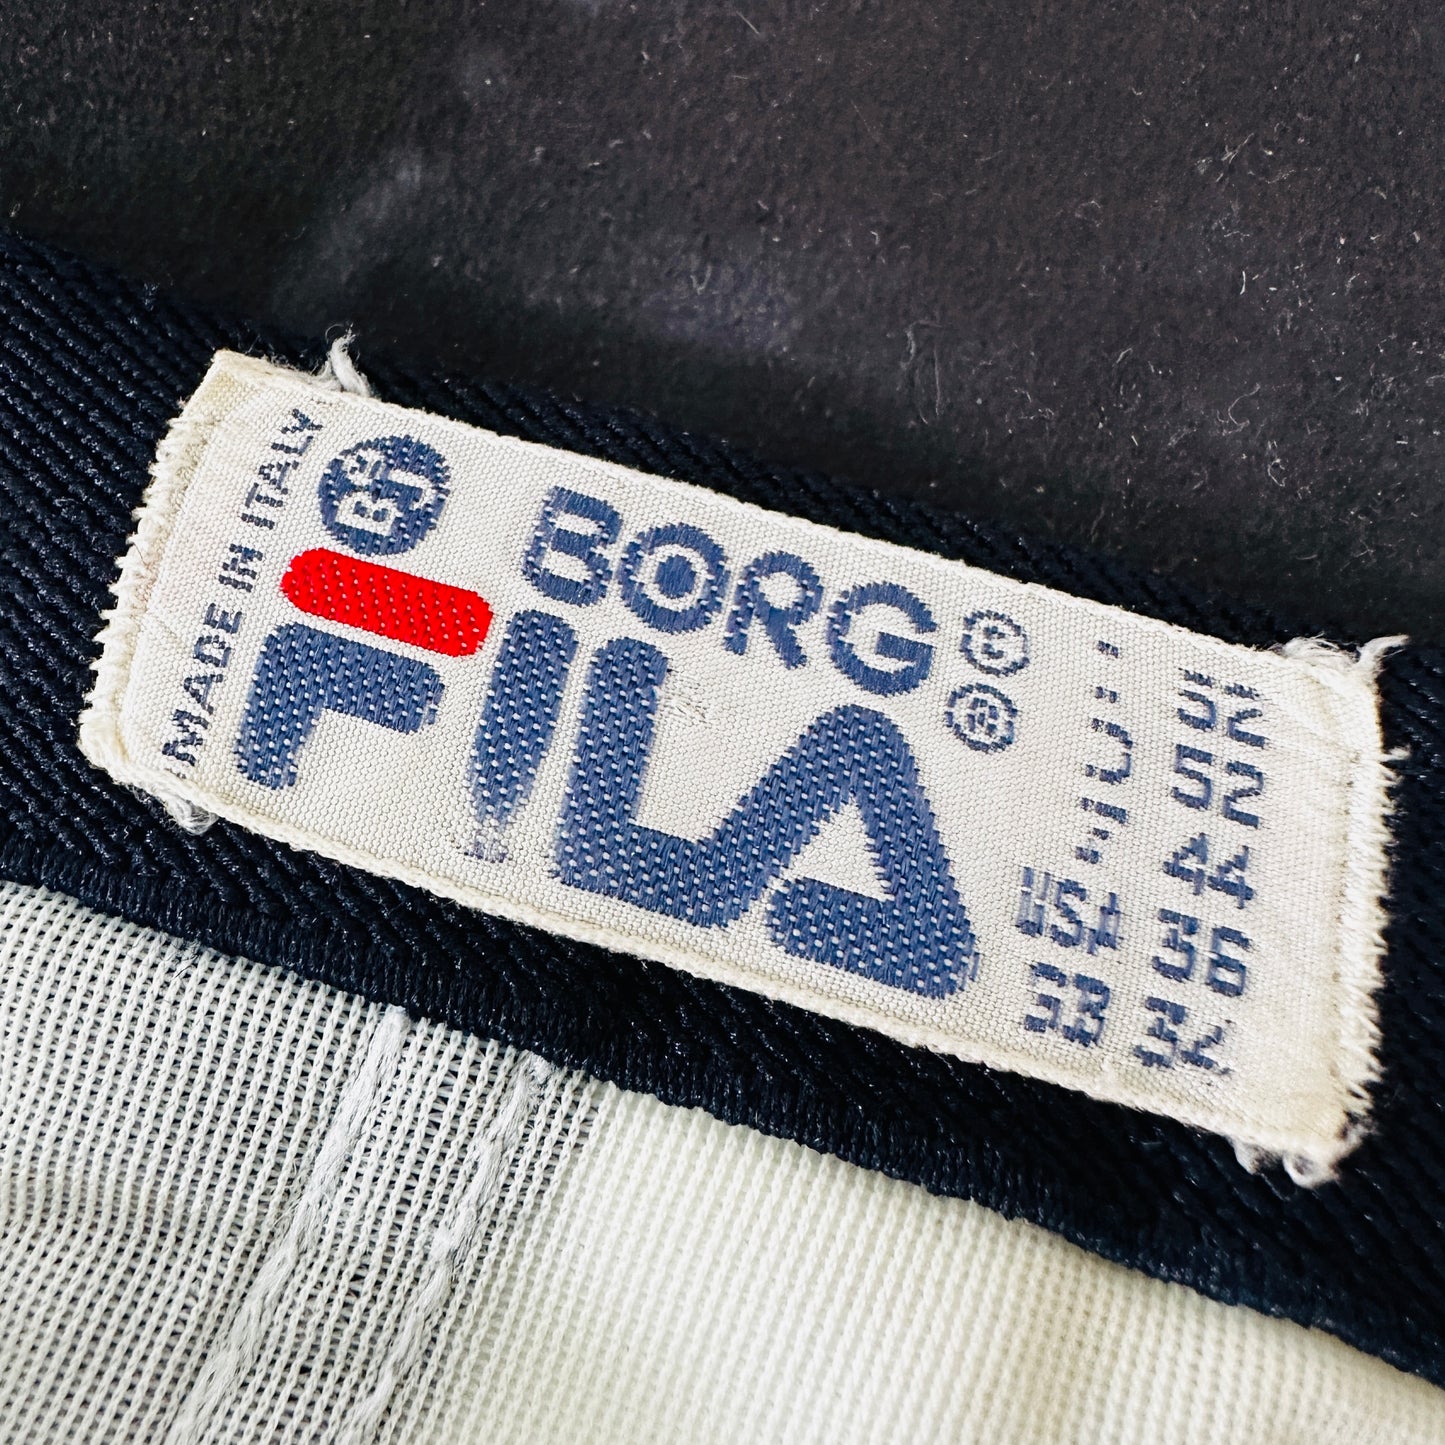 Fila Björn Borg 80s Vintage Tennis Shorts - 52 / L - Made in Italy